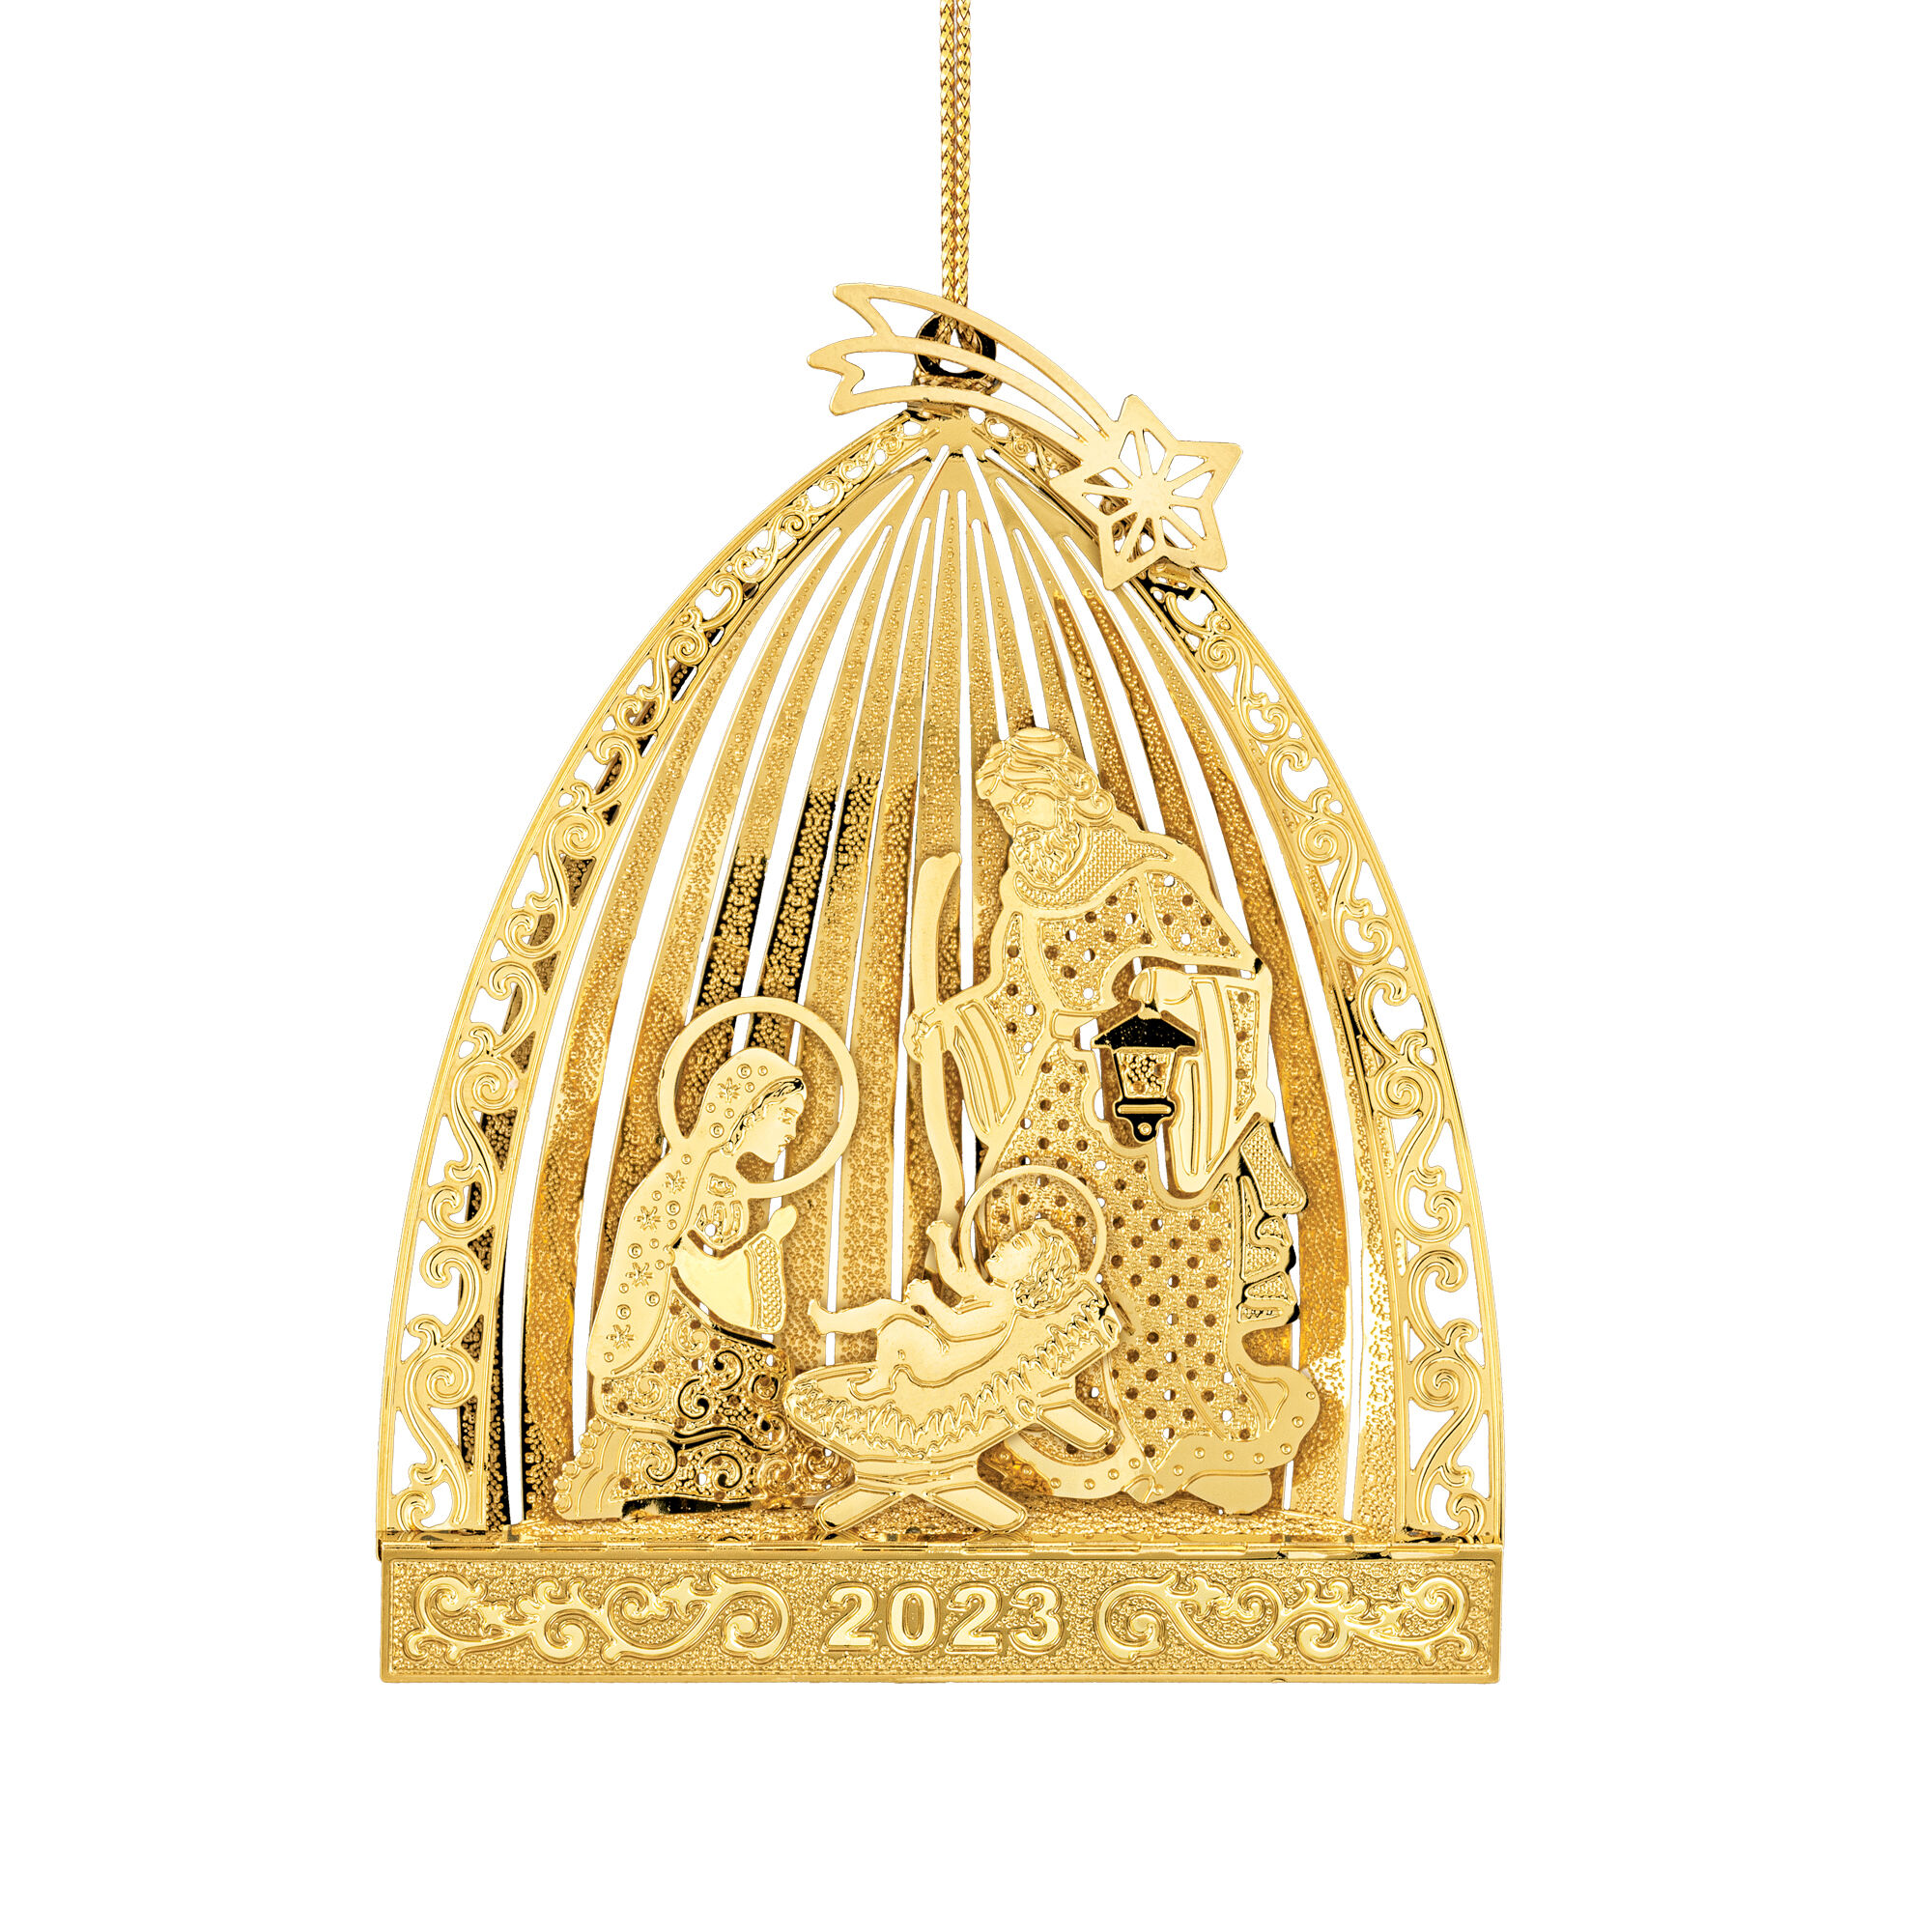 The 2023 Gold Christmas Ornament Collection 10312 0036 g manger